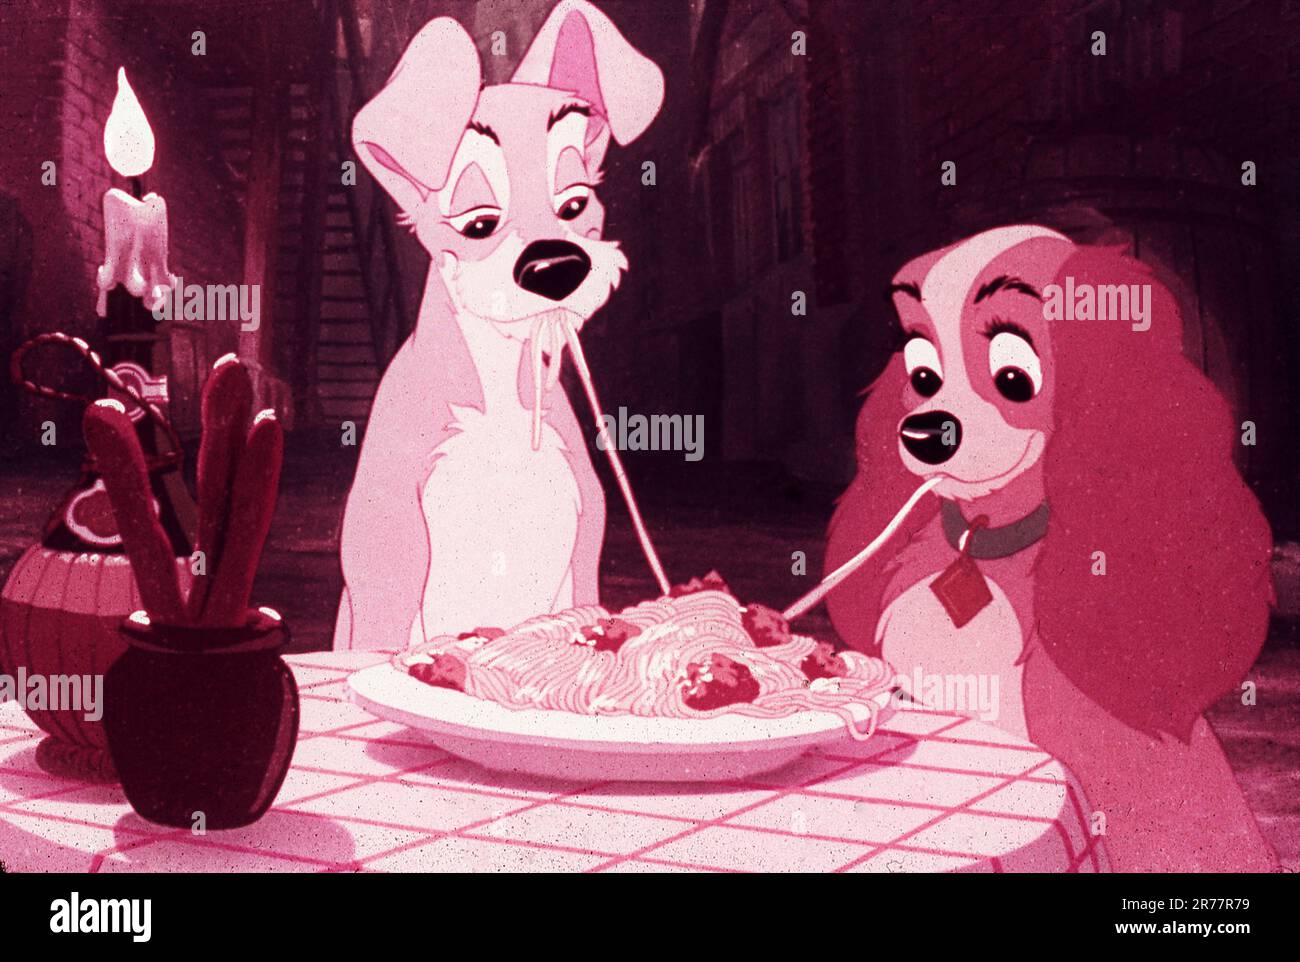 Spaghetti Meal in WALT DISNEY'S LADY AND THE TRAMP 1955 directors CLYDE GERONIMI WILFRED JACKSON and HAMILTON LUSKE from the story by Ward Greene Walt Disney productions / Buena Vista Film Distribution Company Stock Photo